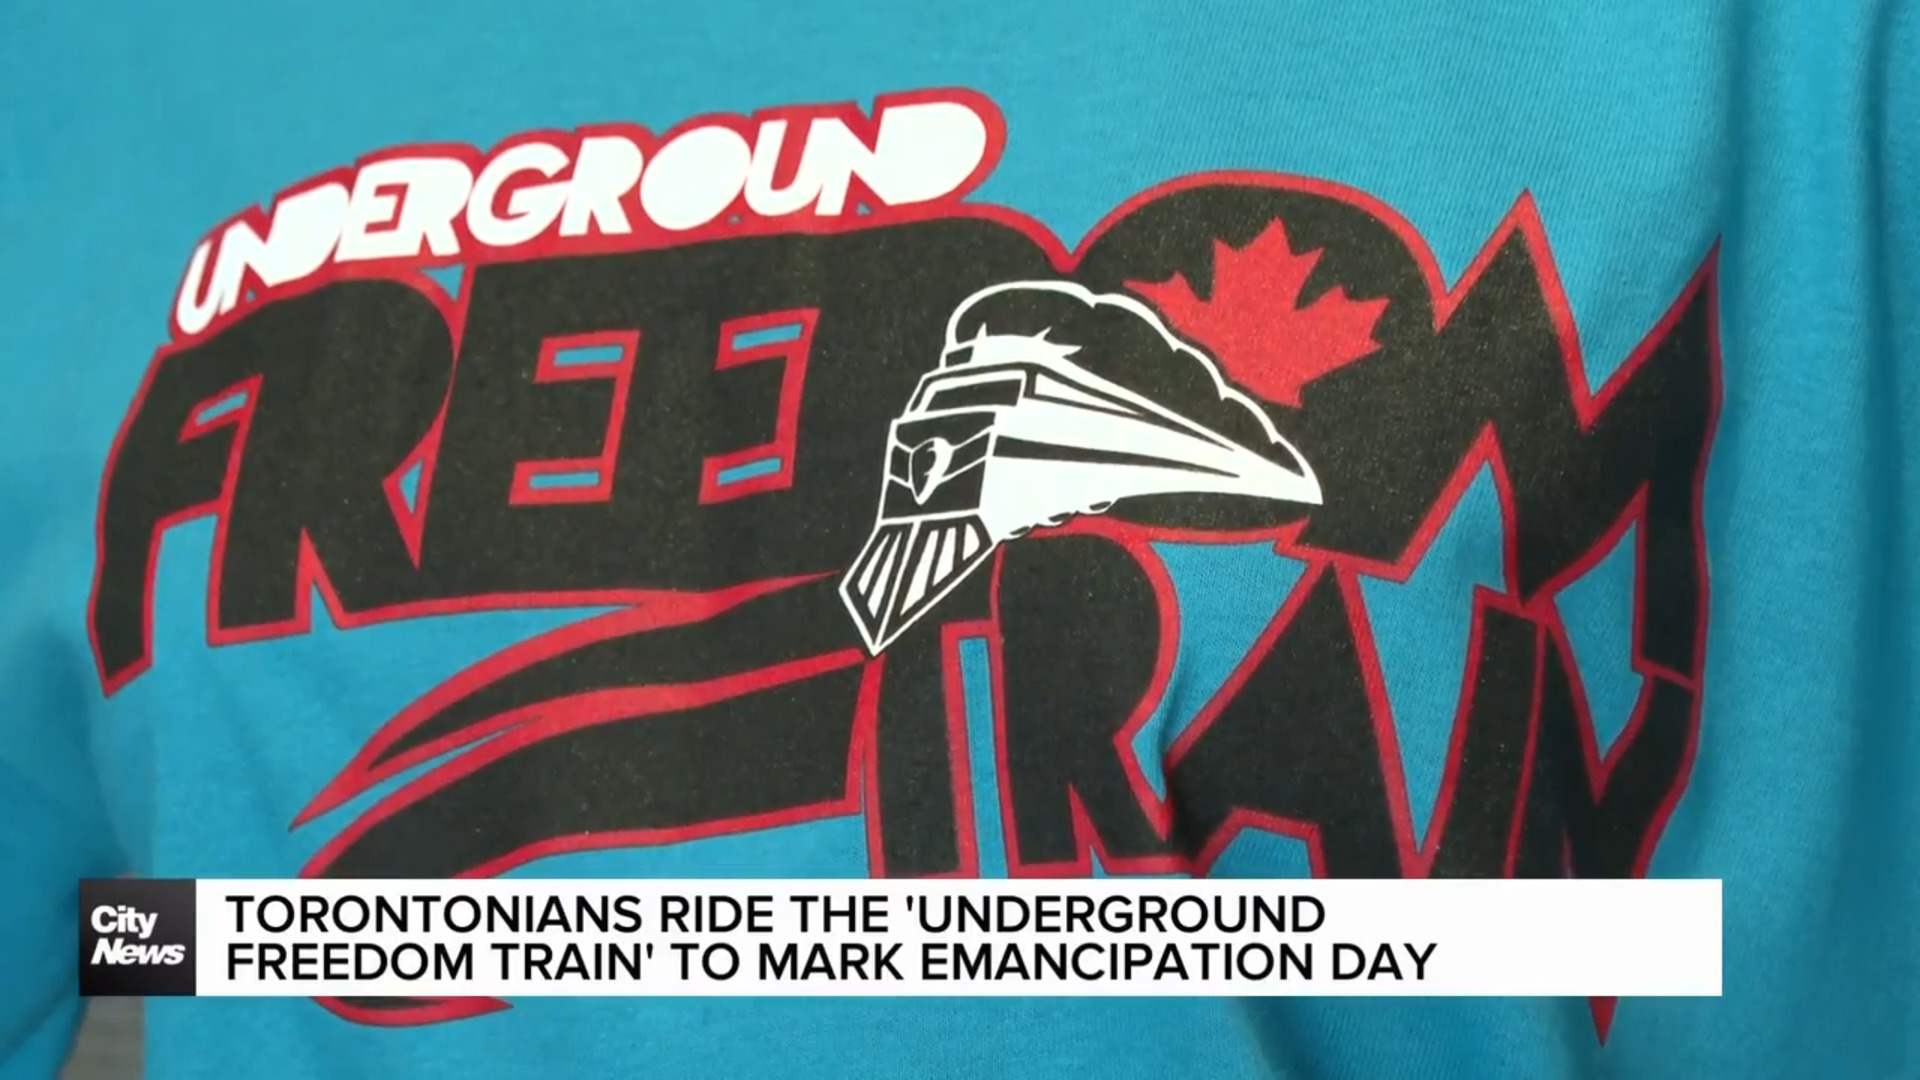 TTC hosting an event commemorating the abolition of slavery